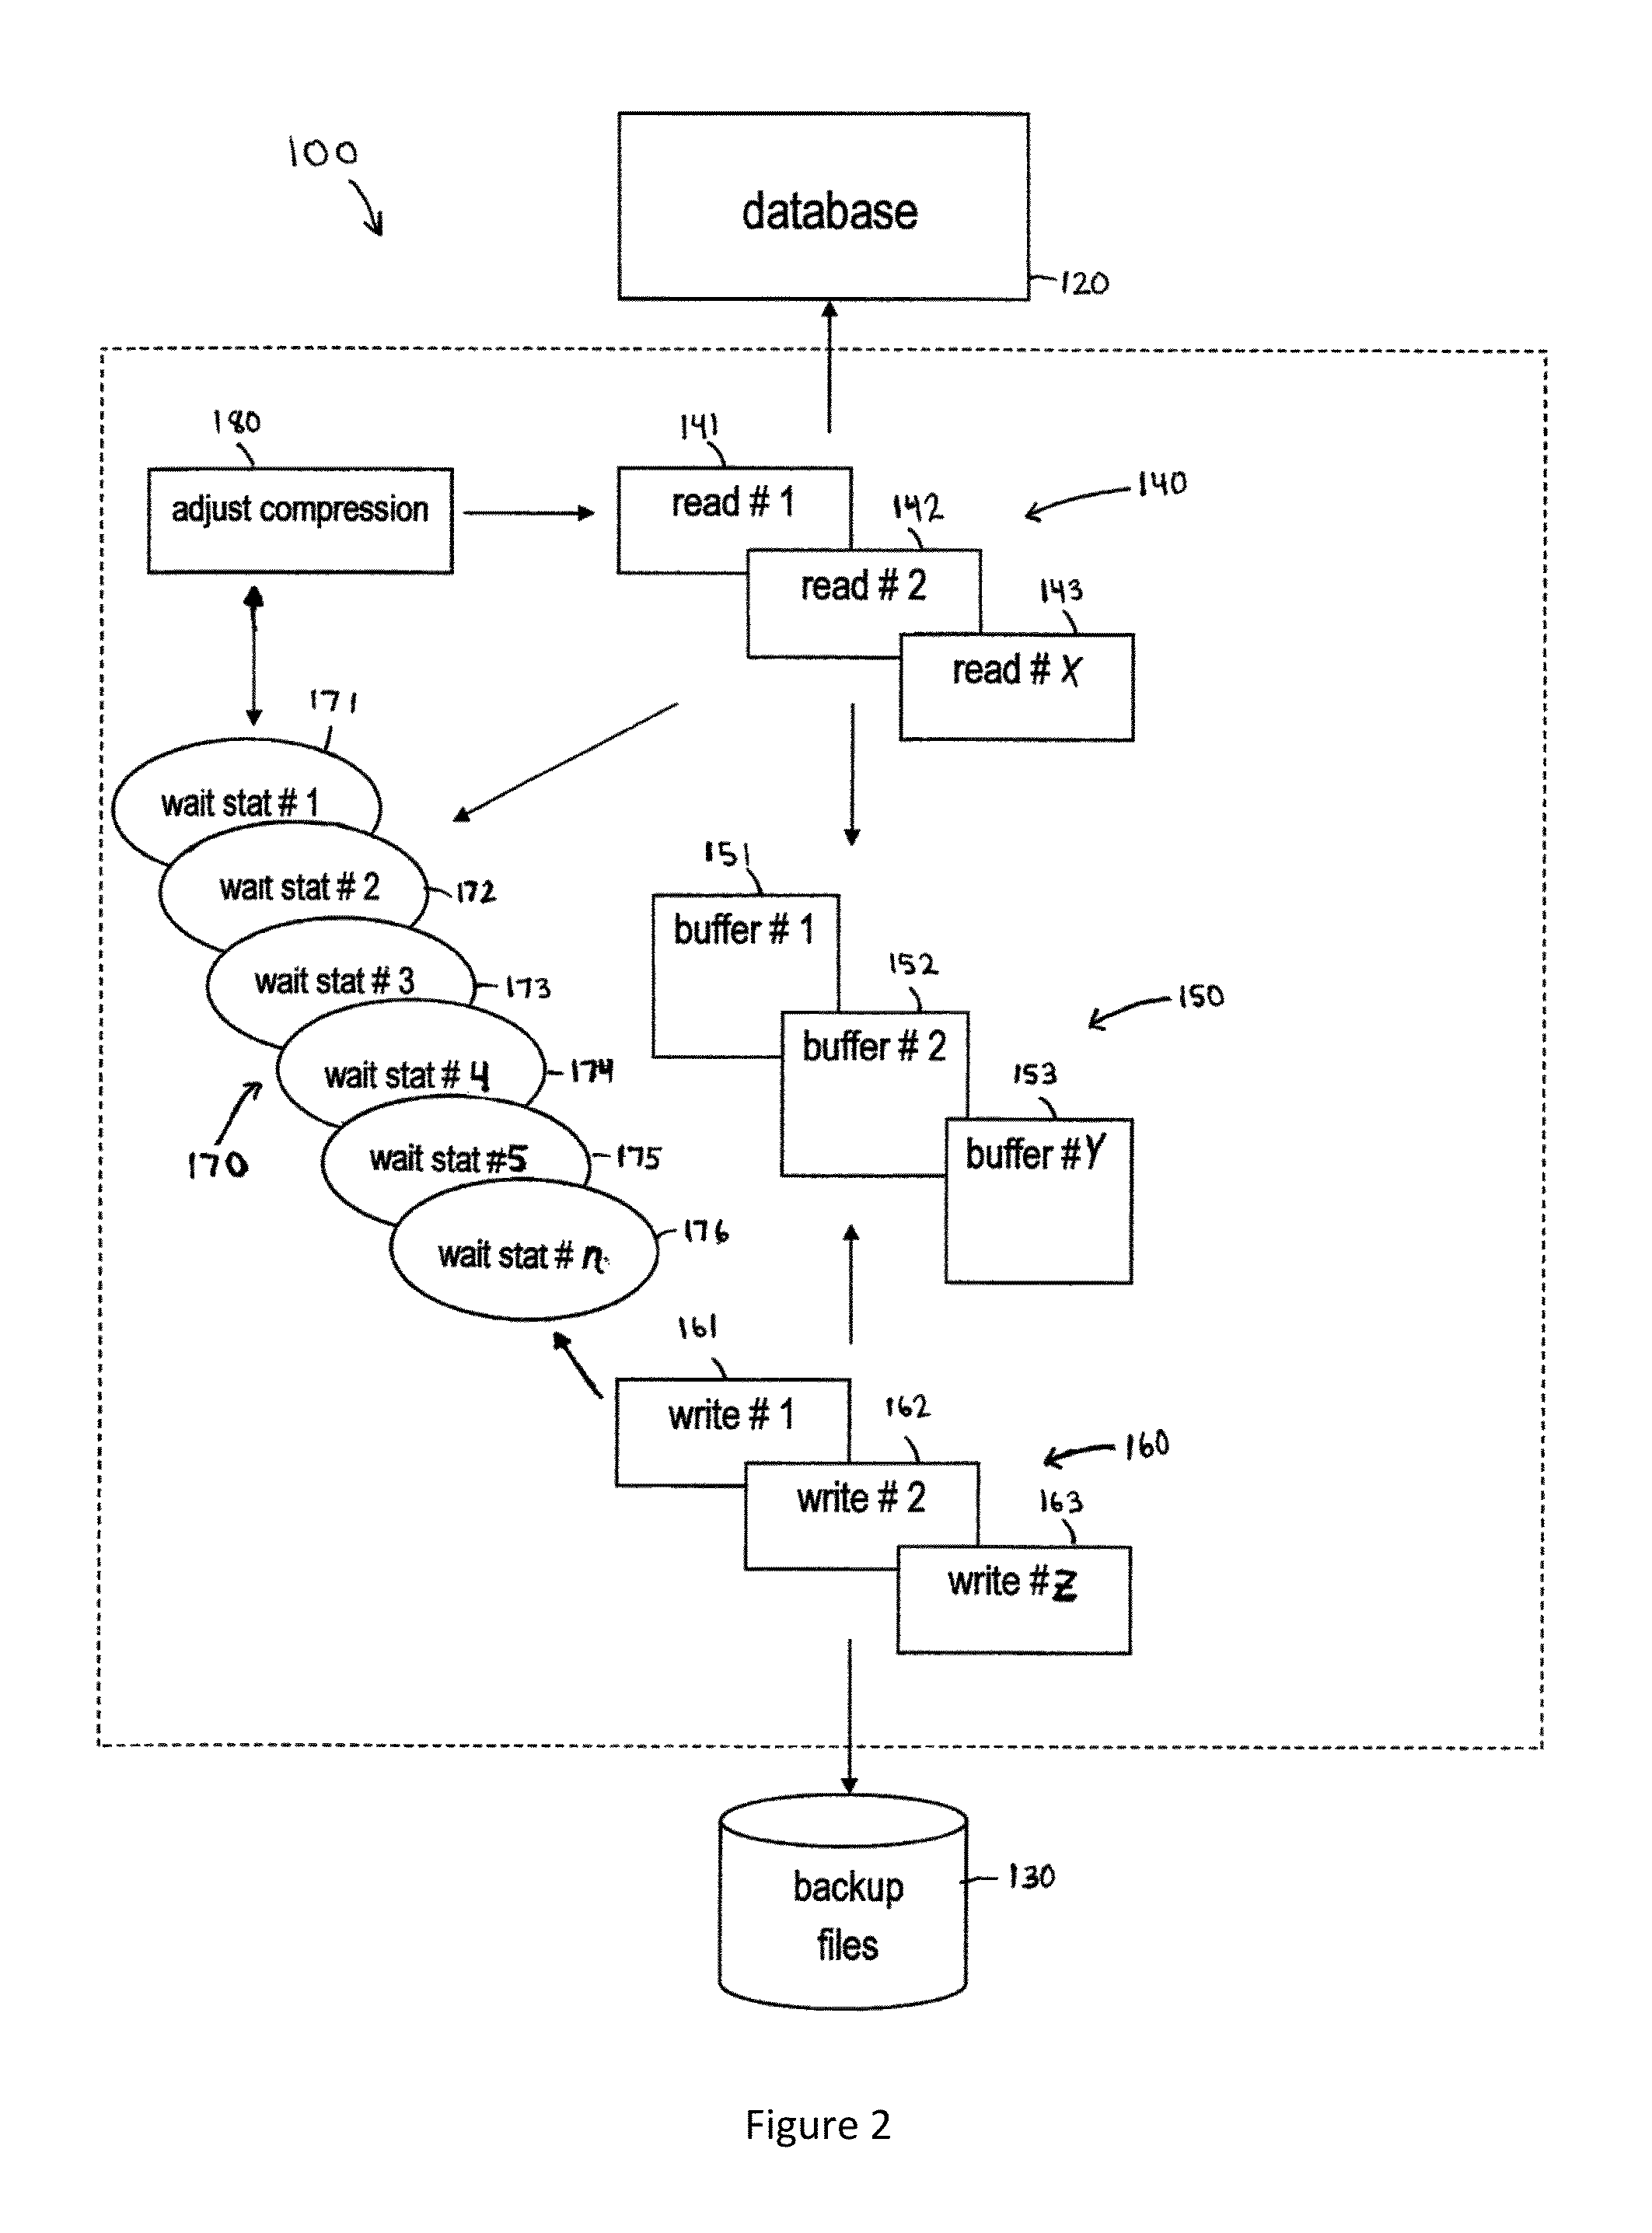 System and method for high speed database backup using rapidly adjusted dynamic compression ratios controlled by a feedback loop